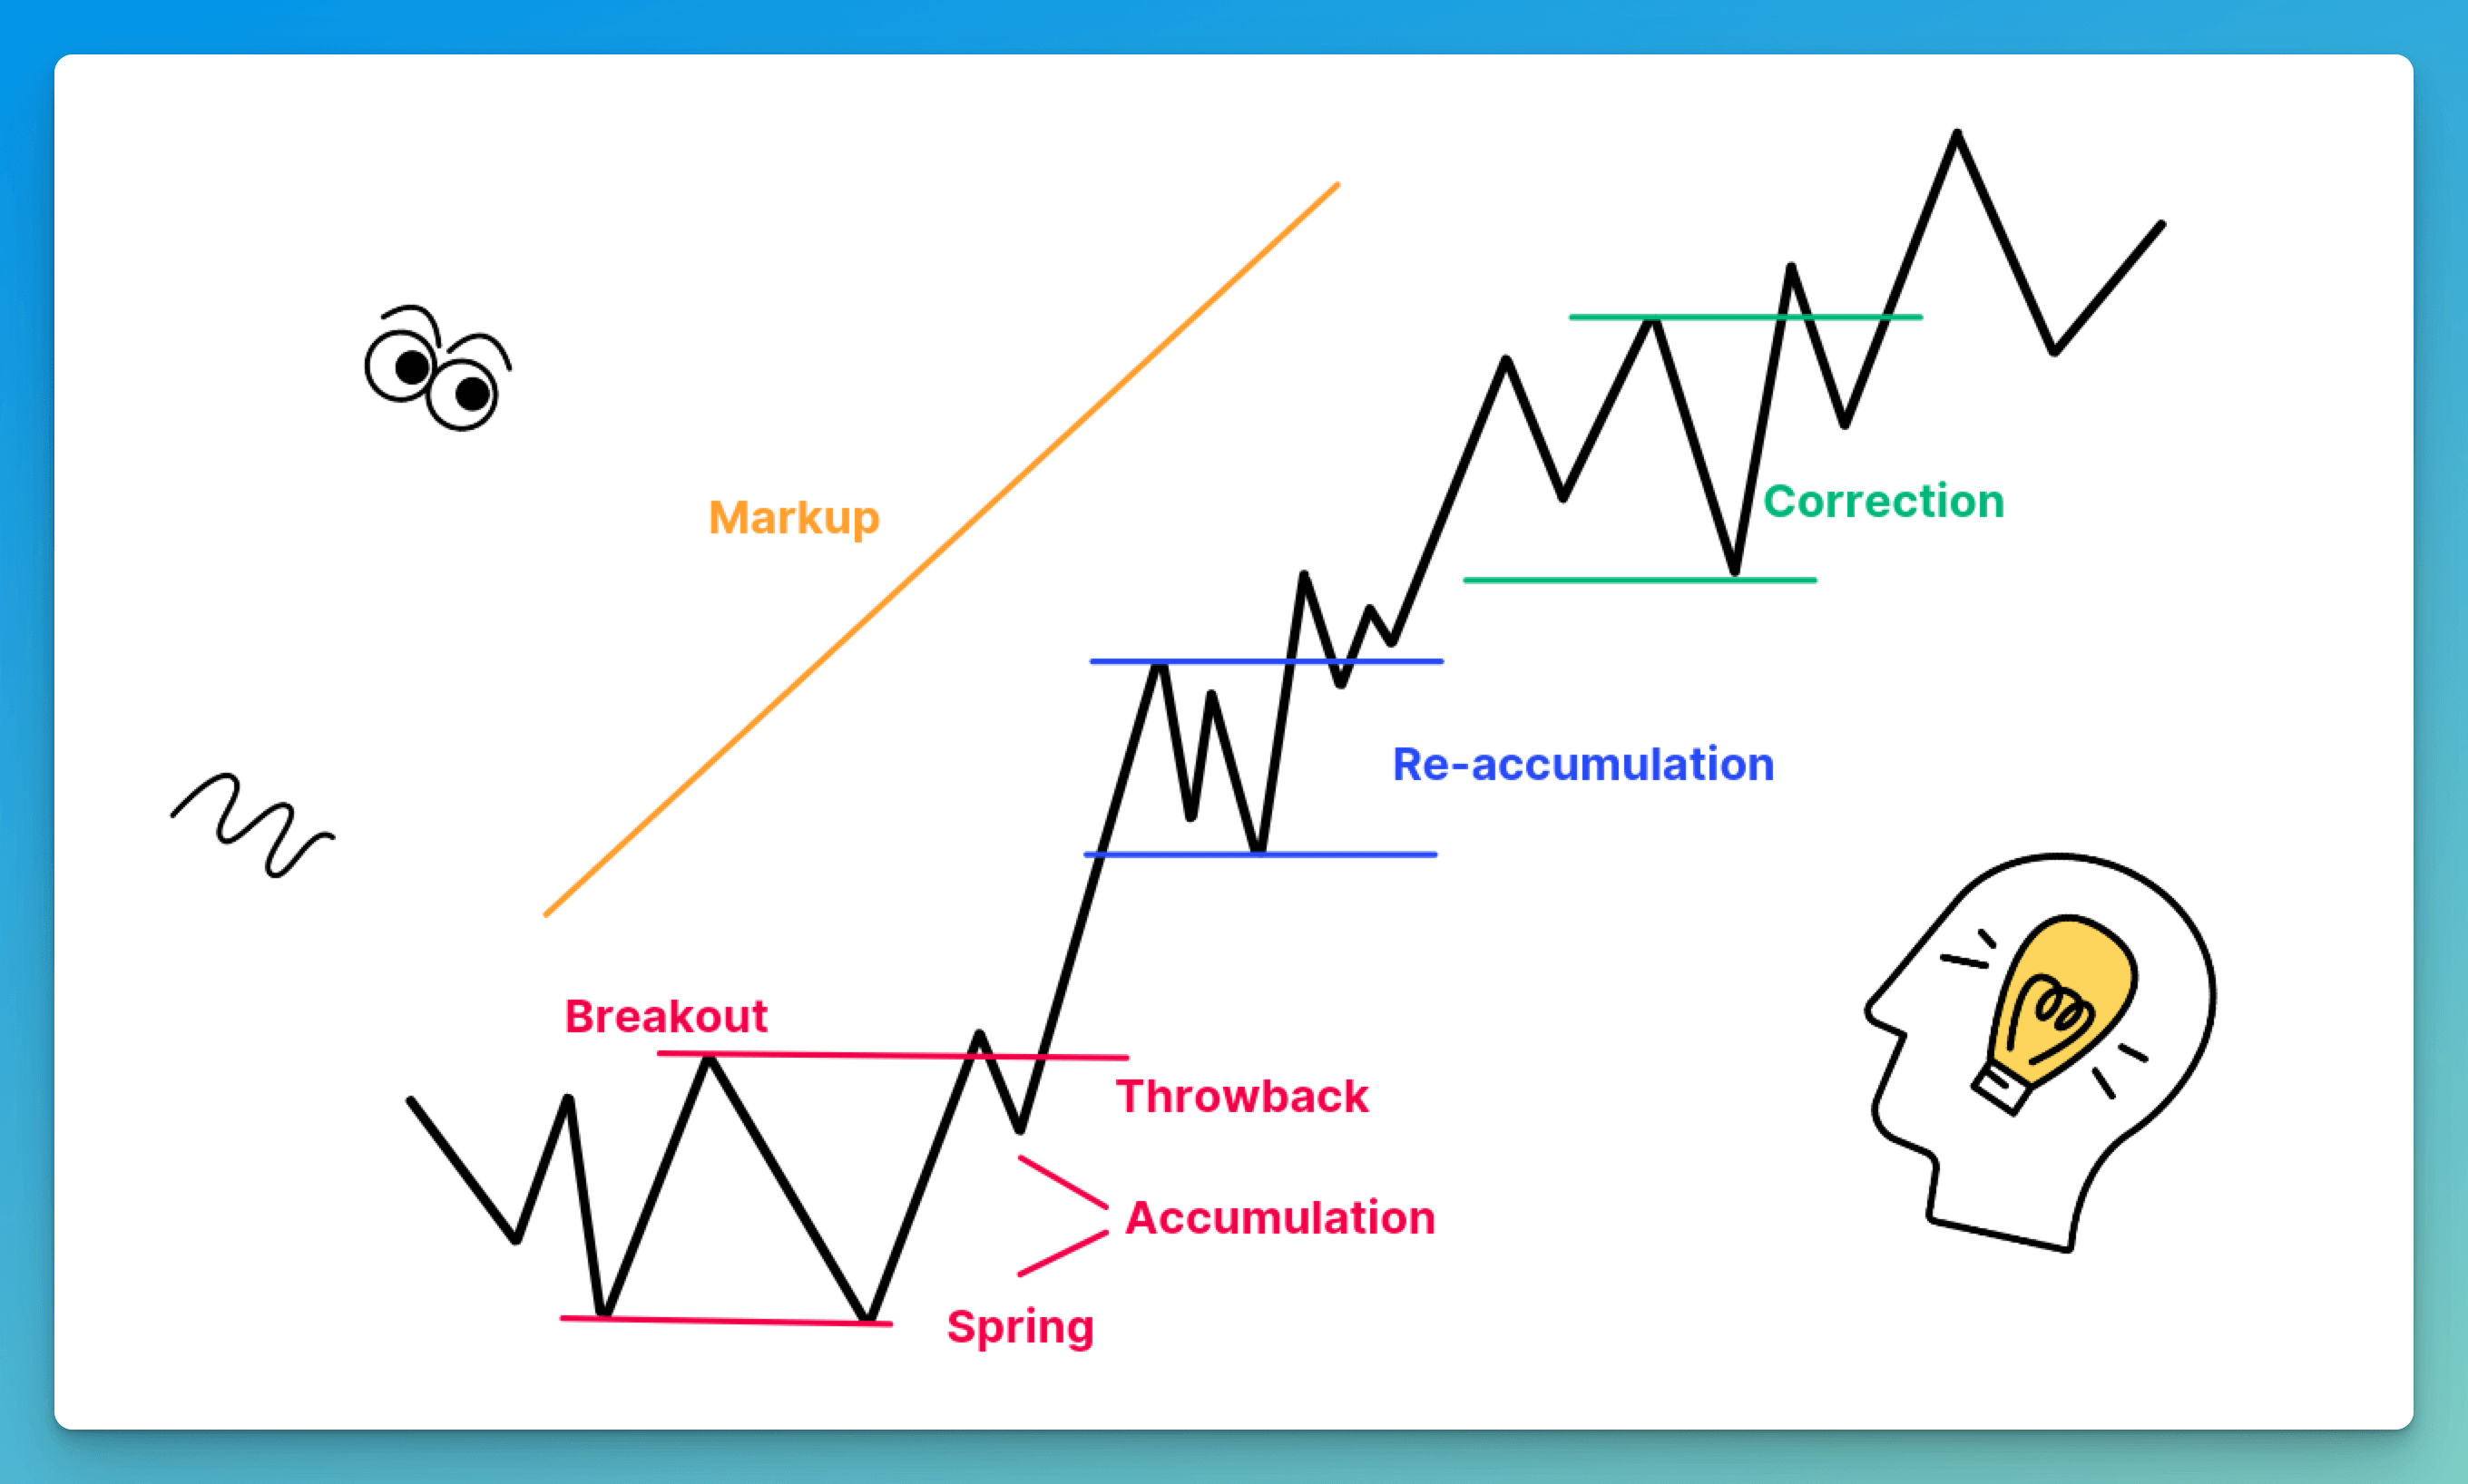 Pic. 2. The Wyckoff accumulation schematic followed by the markup phase.